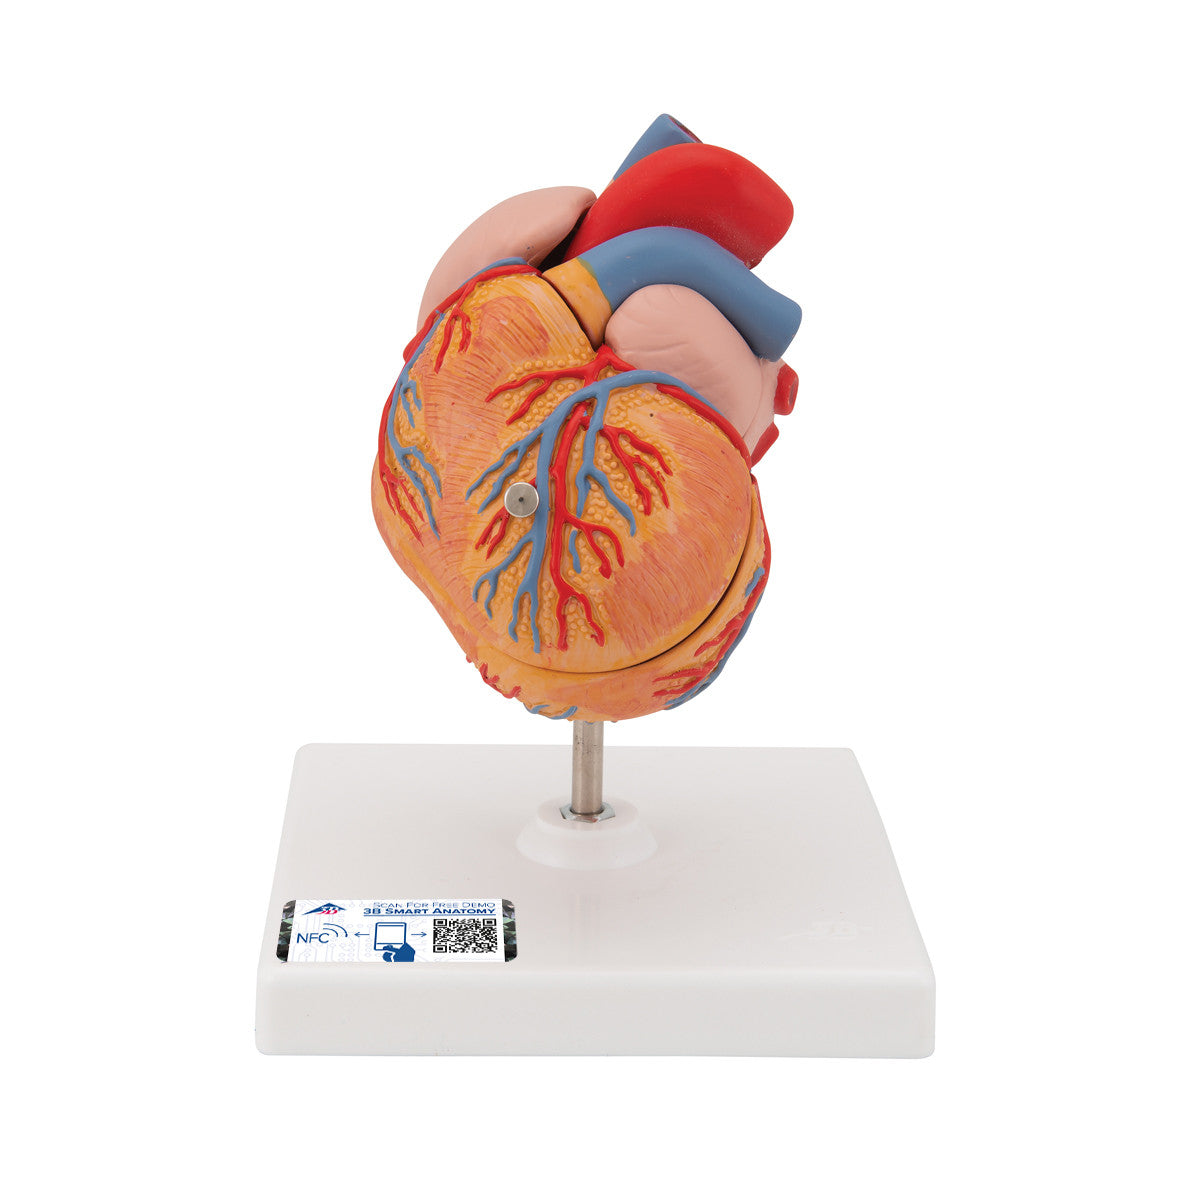 Classic Human Heart Model with Left Ventricular Hypertrophy (LVH), 2 part - 3B Smart Anatomy - G04